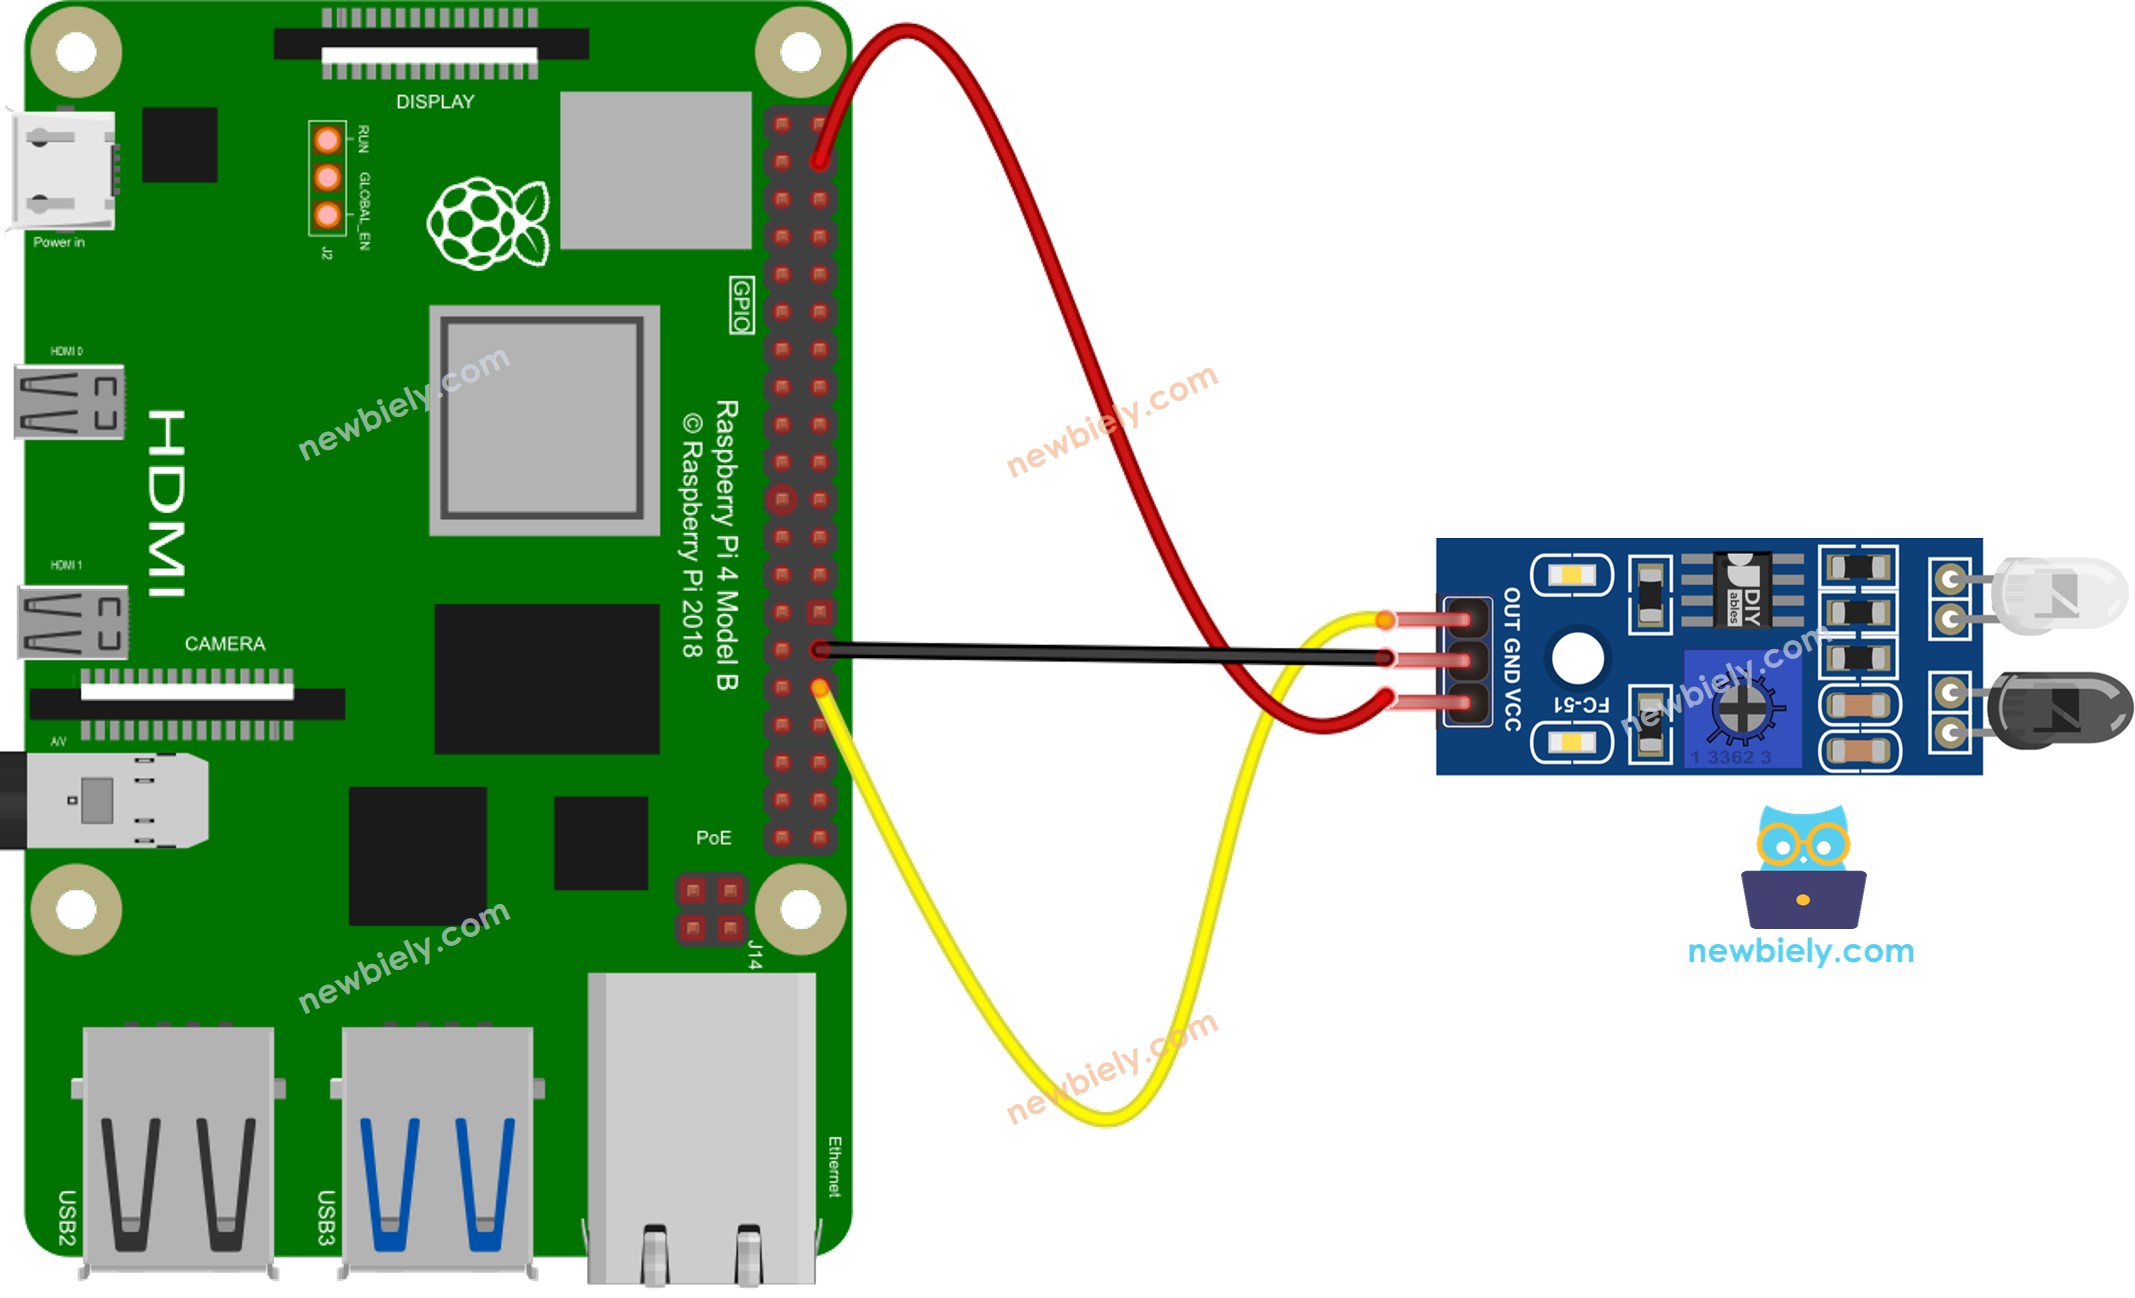 The wiring diagram between Raspberry Pi and IR Obstacle Avoidance Sensor